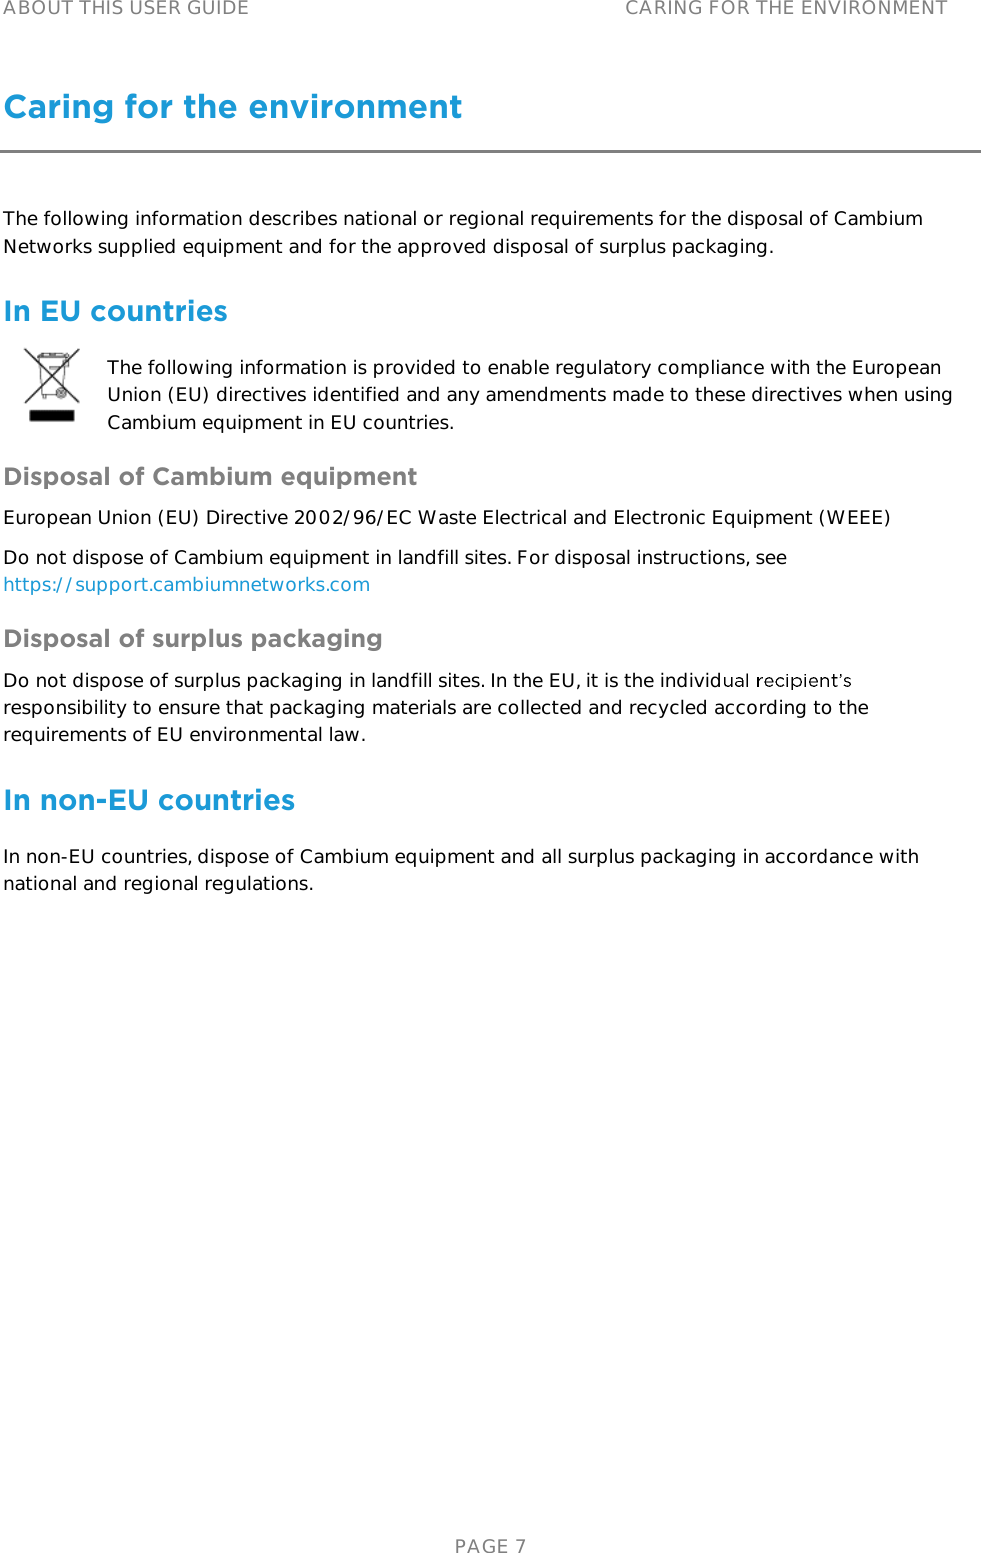 ABOUT THIS USER GUIDE CARING FOR THE ENVIRONMENT   PAGE 7 Caring for the environment The following information describes national or regional requirements for the disposal of Cambium Networks supplied equipment and for the approved disposal of surplus packaging. In EU countries The following information is provided to enable regulatory compliance with the European Union (EU) directives identified and any amendments made to these directives when using Cambium equipment in EU countries. Disposal of Cambium equipment European Union (EU) Directive 2002/96/EC Waste Electrical and Electronic Equipment (WEEE) Do not dispose of Cambium equipment in landfill sites. For disposal instructions, see https://support.cambiumnetworks.com Disposal of surplus packaging Do not dispose of surplus packaging in landfill sites. In the EU, it is the individresponsibility to ensure that packaging materials are collected and recycled according to the requirements of EU environmental law. In non-EU countries In non-EU countries, dispose of Cambium equipment and all surplus packaging in accordance with national and regional regulations.   